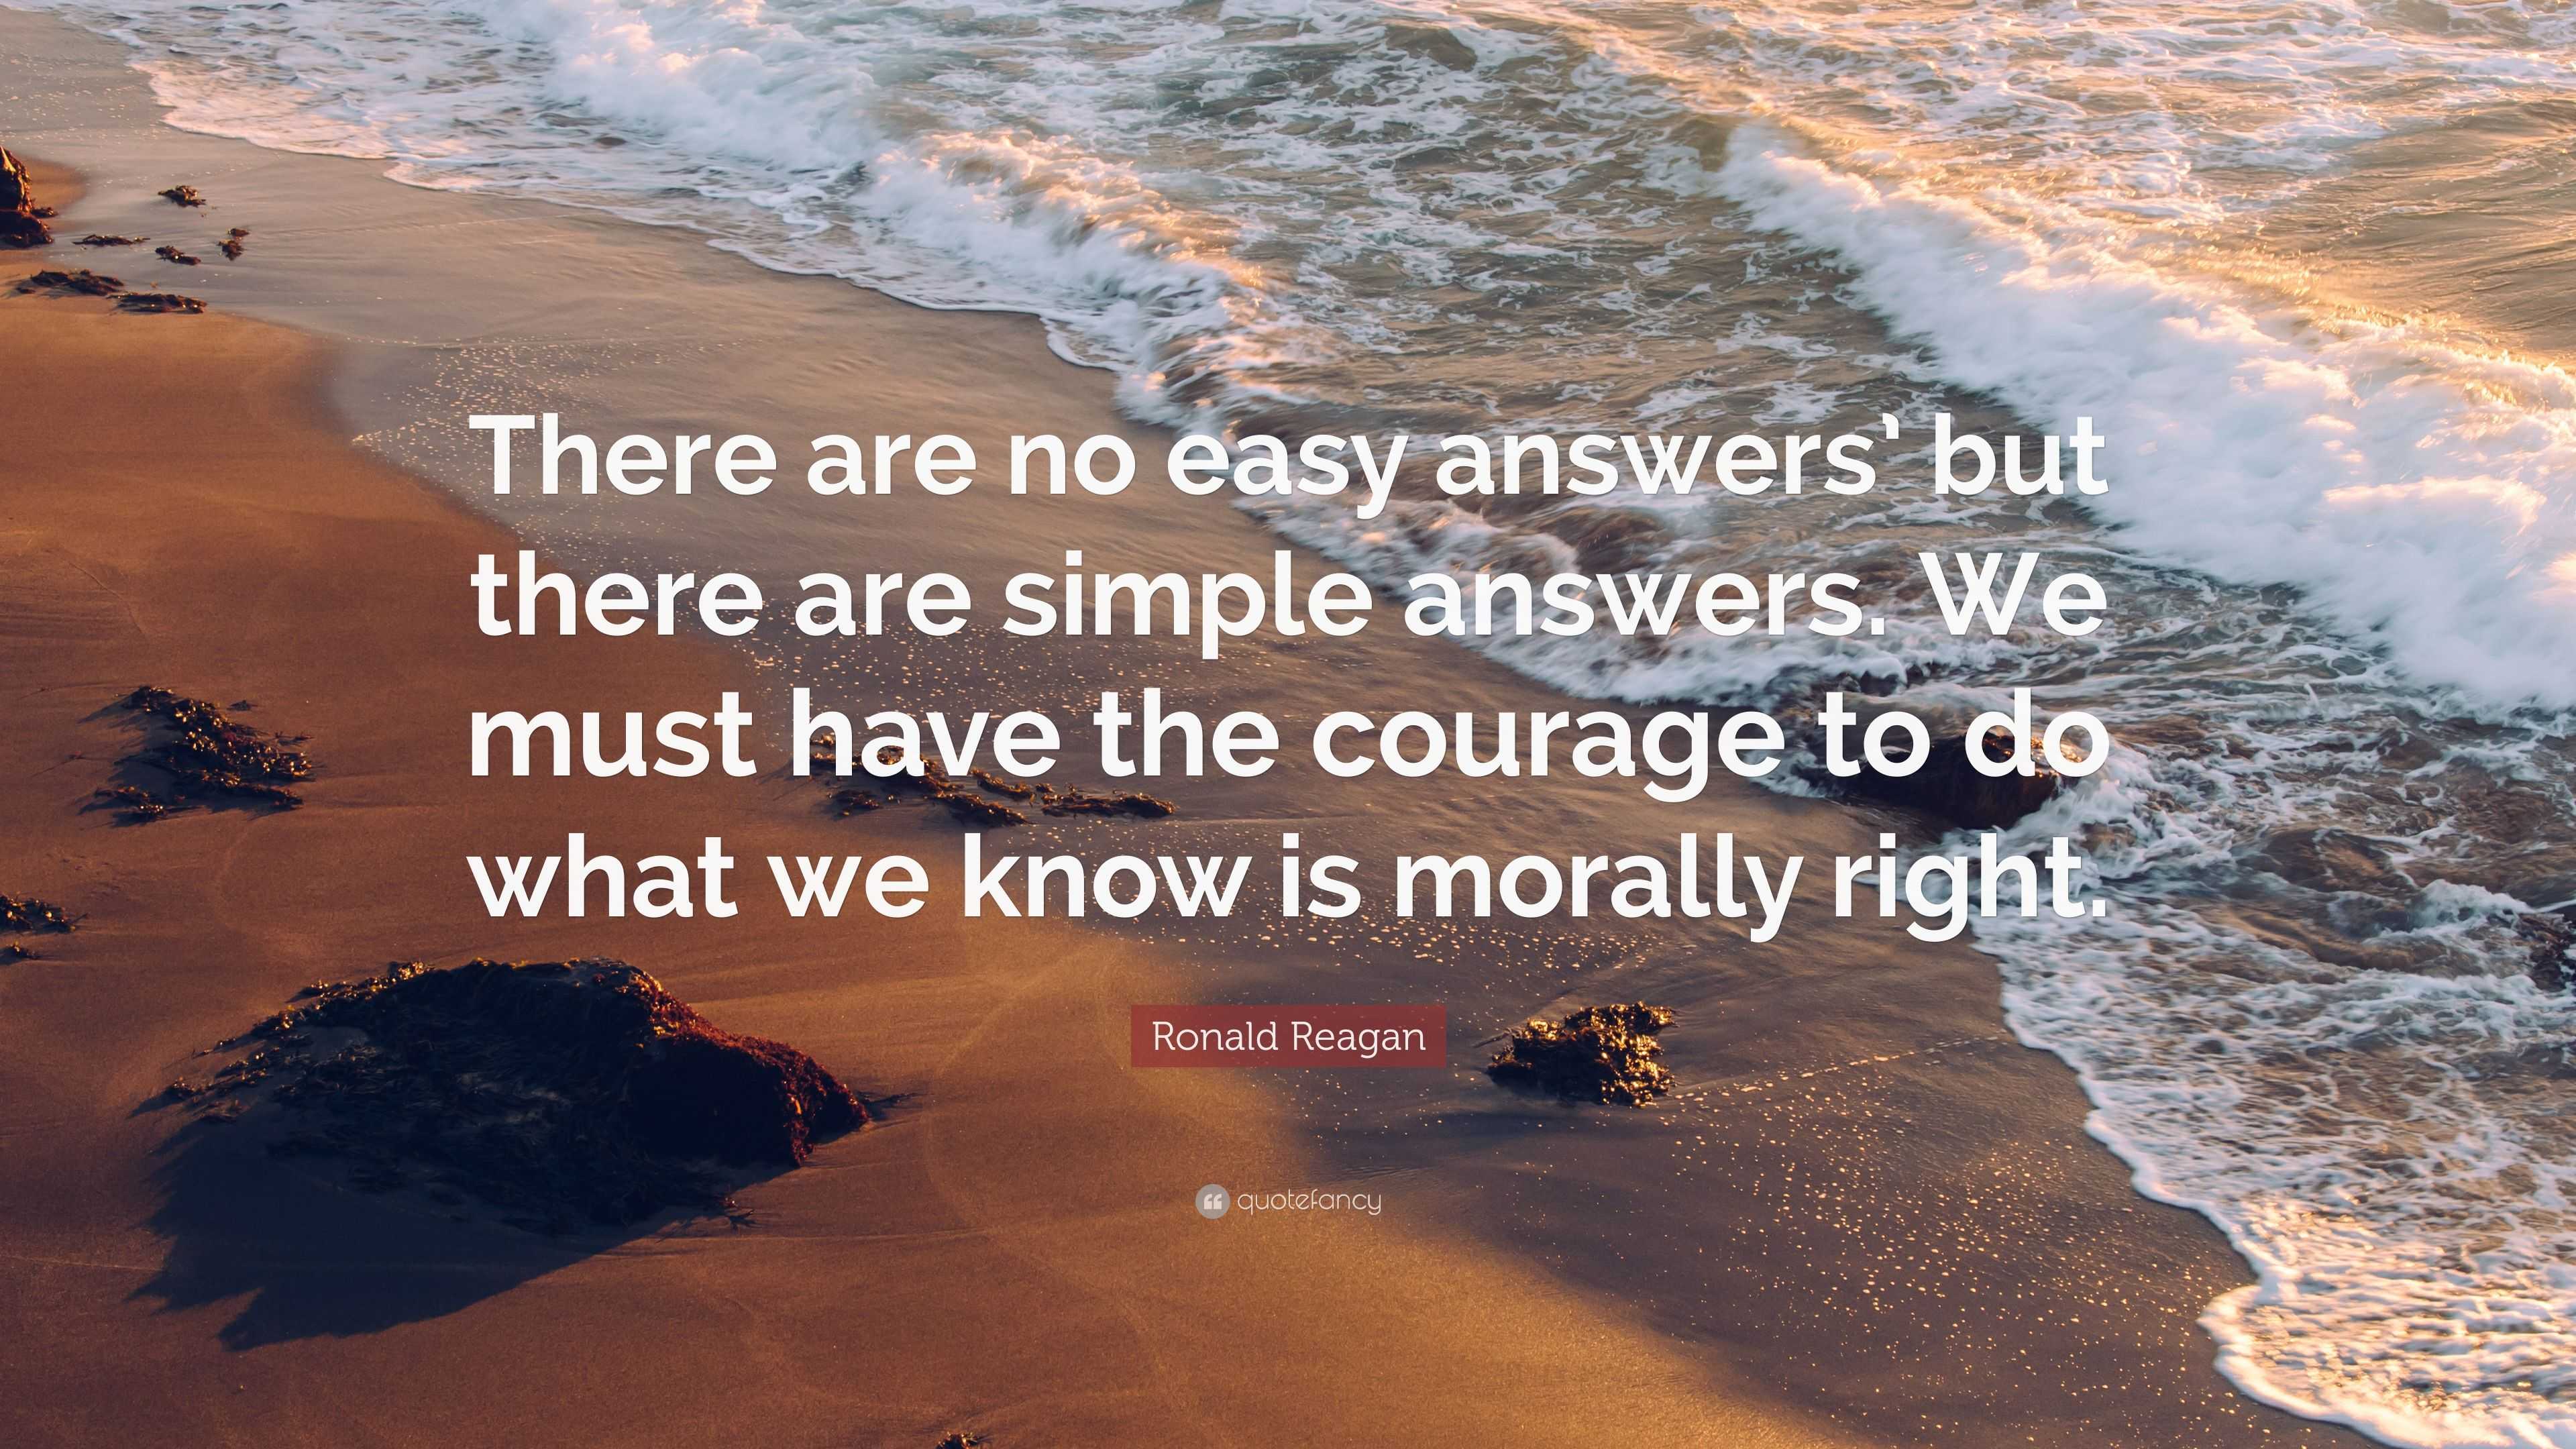 Ronald Reagan Quote: “There are no easy answers’ but there are simple